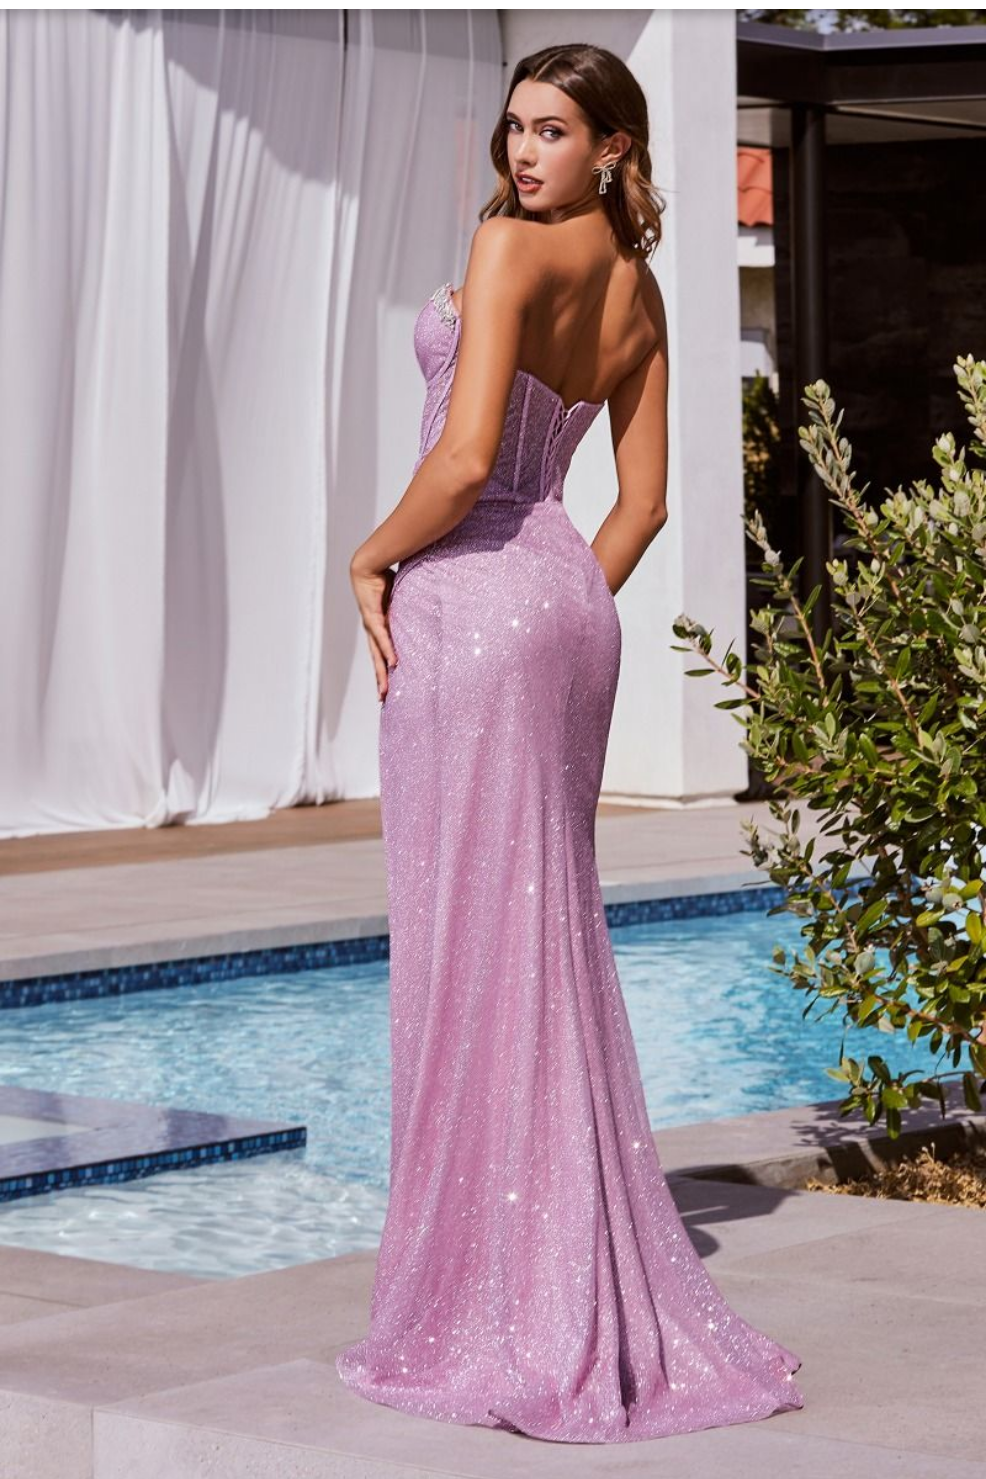 GLITTER CORSET GOWN WITH EMBELLISHMENTS